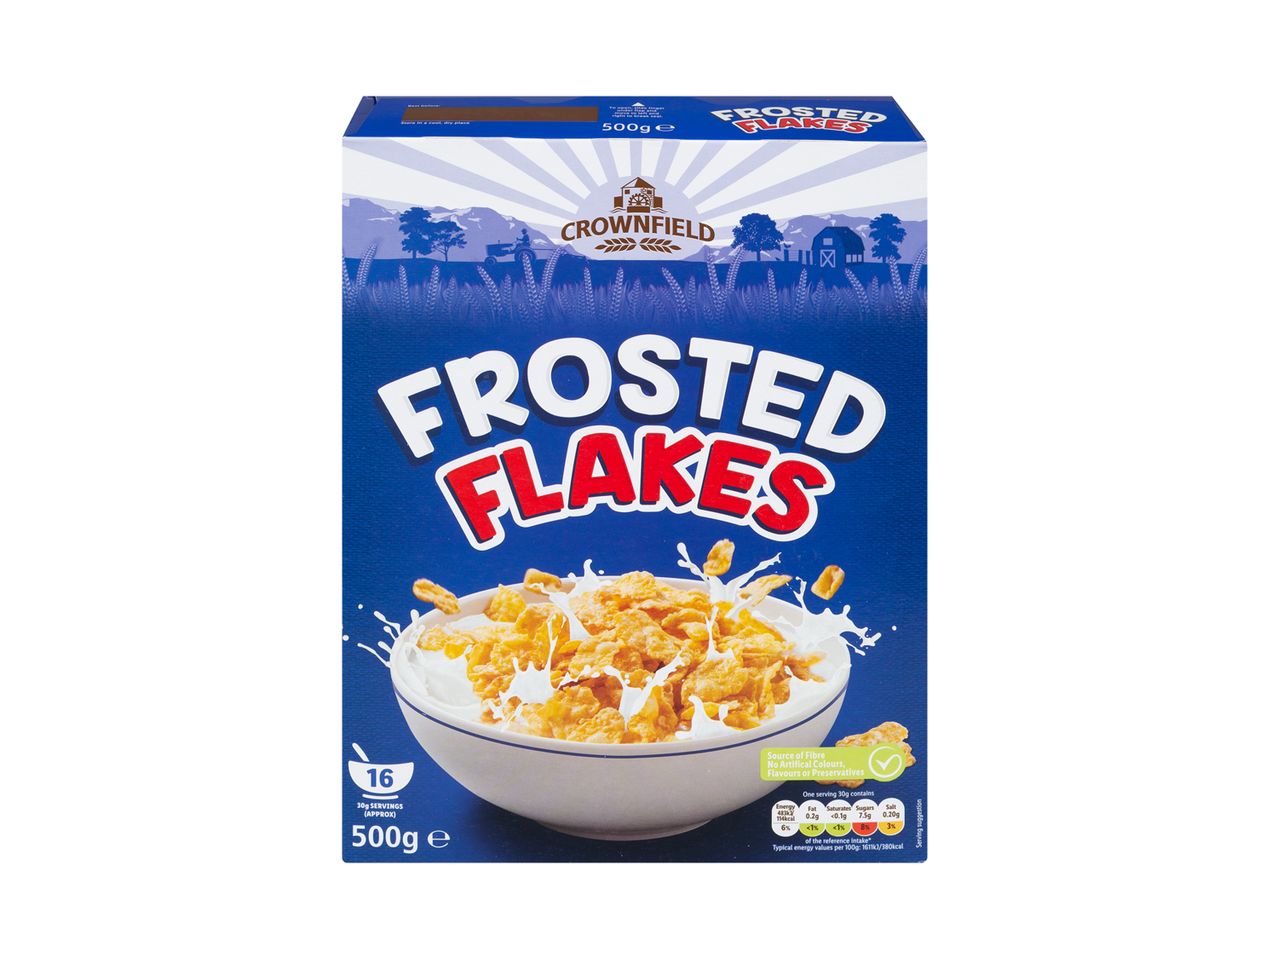 Go to full screen view: Crownfield Frosted Flakes - Image 1